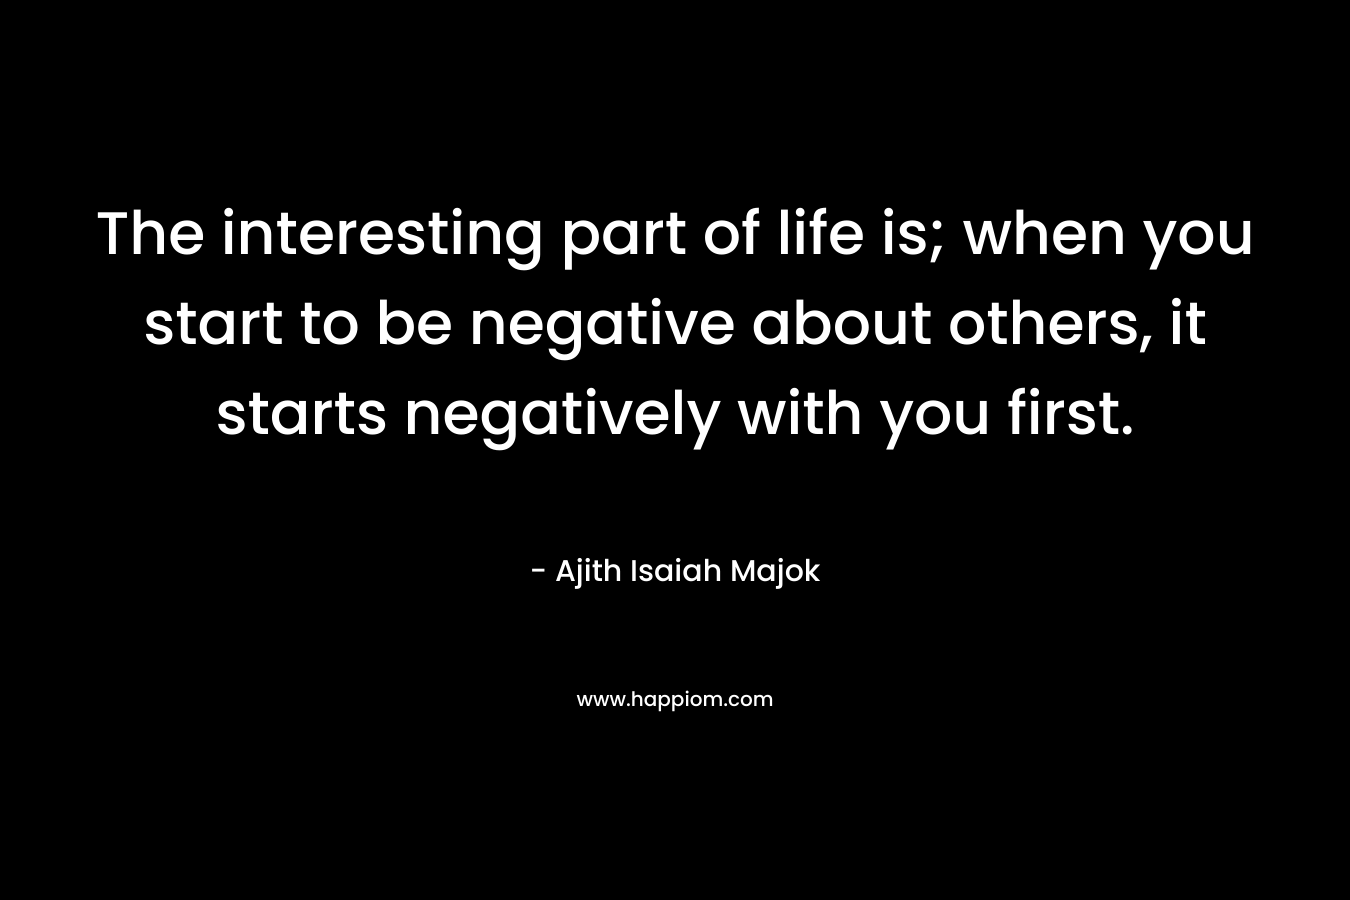 The interesting part of life is; when you start to be negative about others, it starts negatively with you first. – Ajith Isaiah Majok